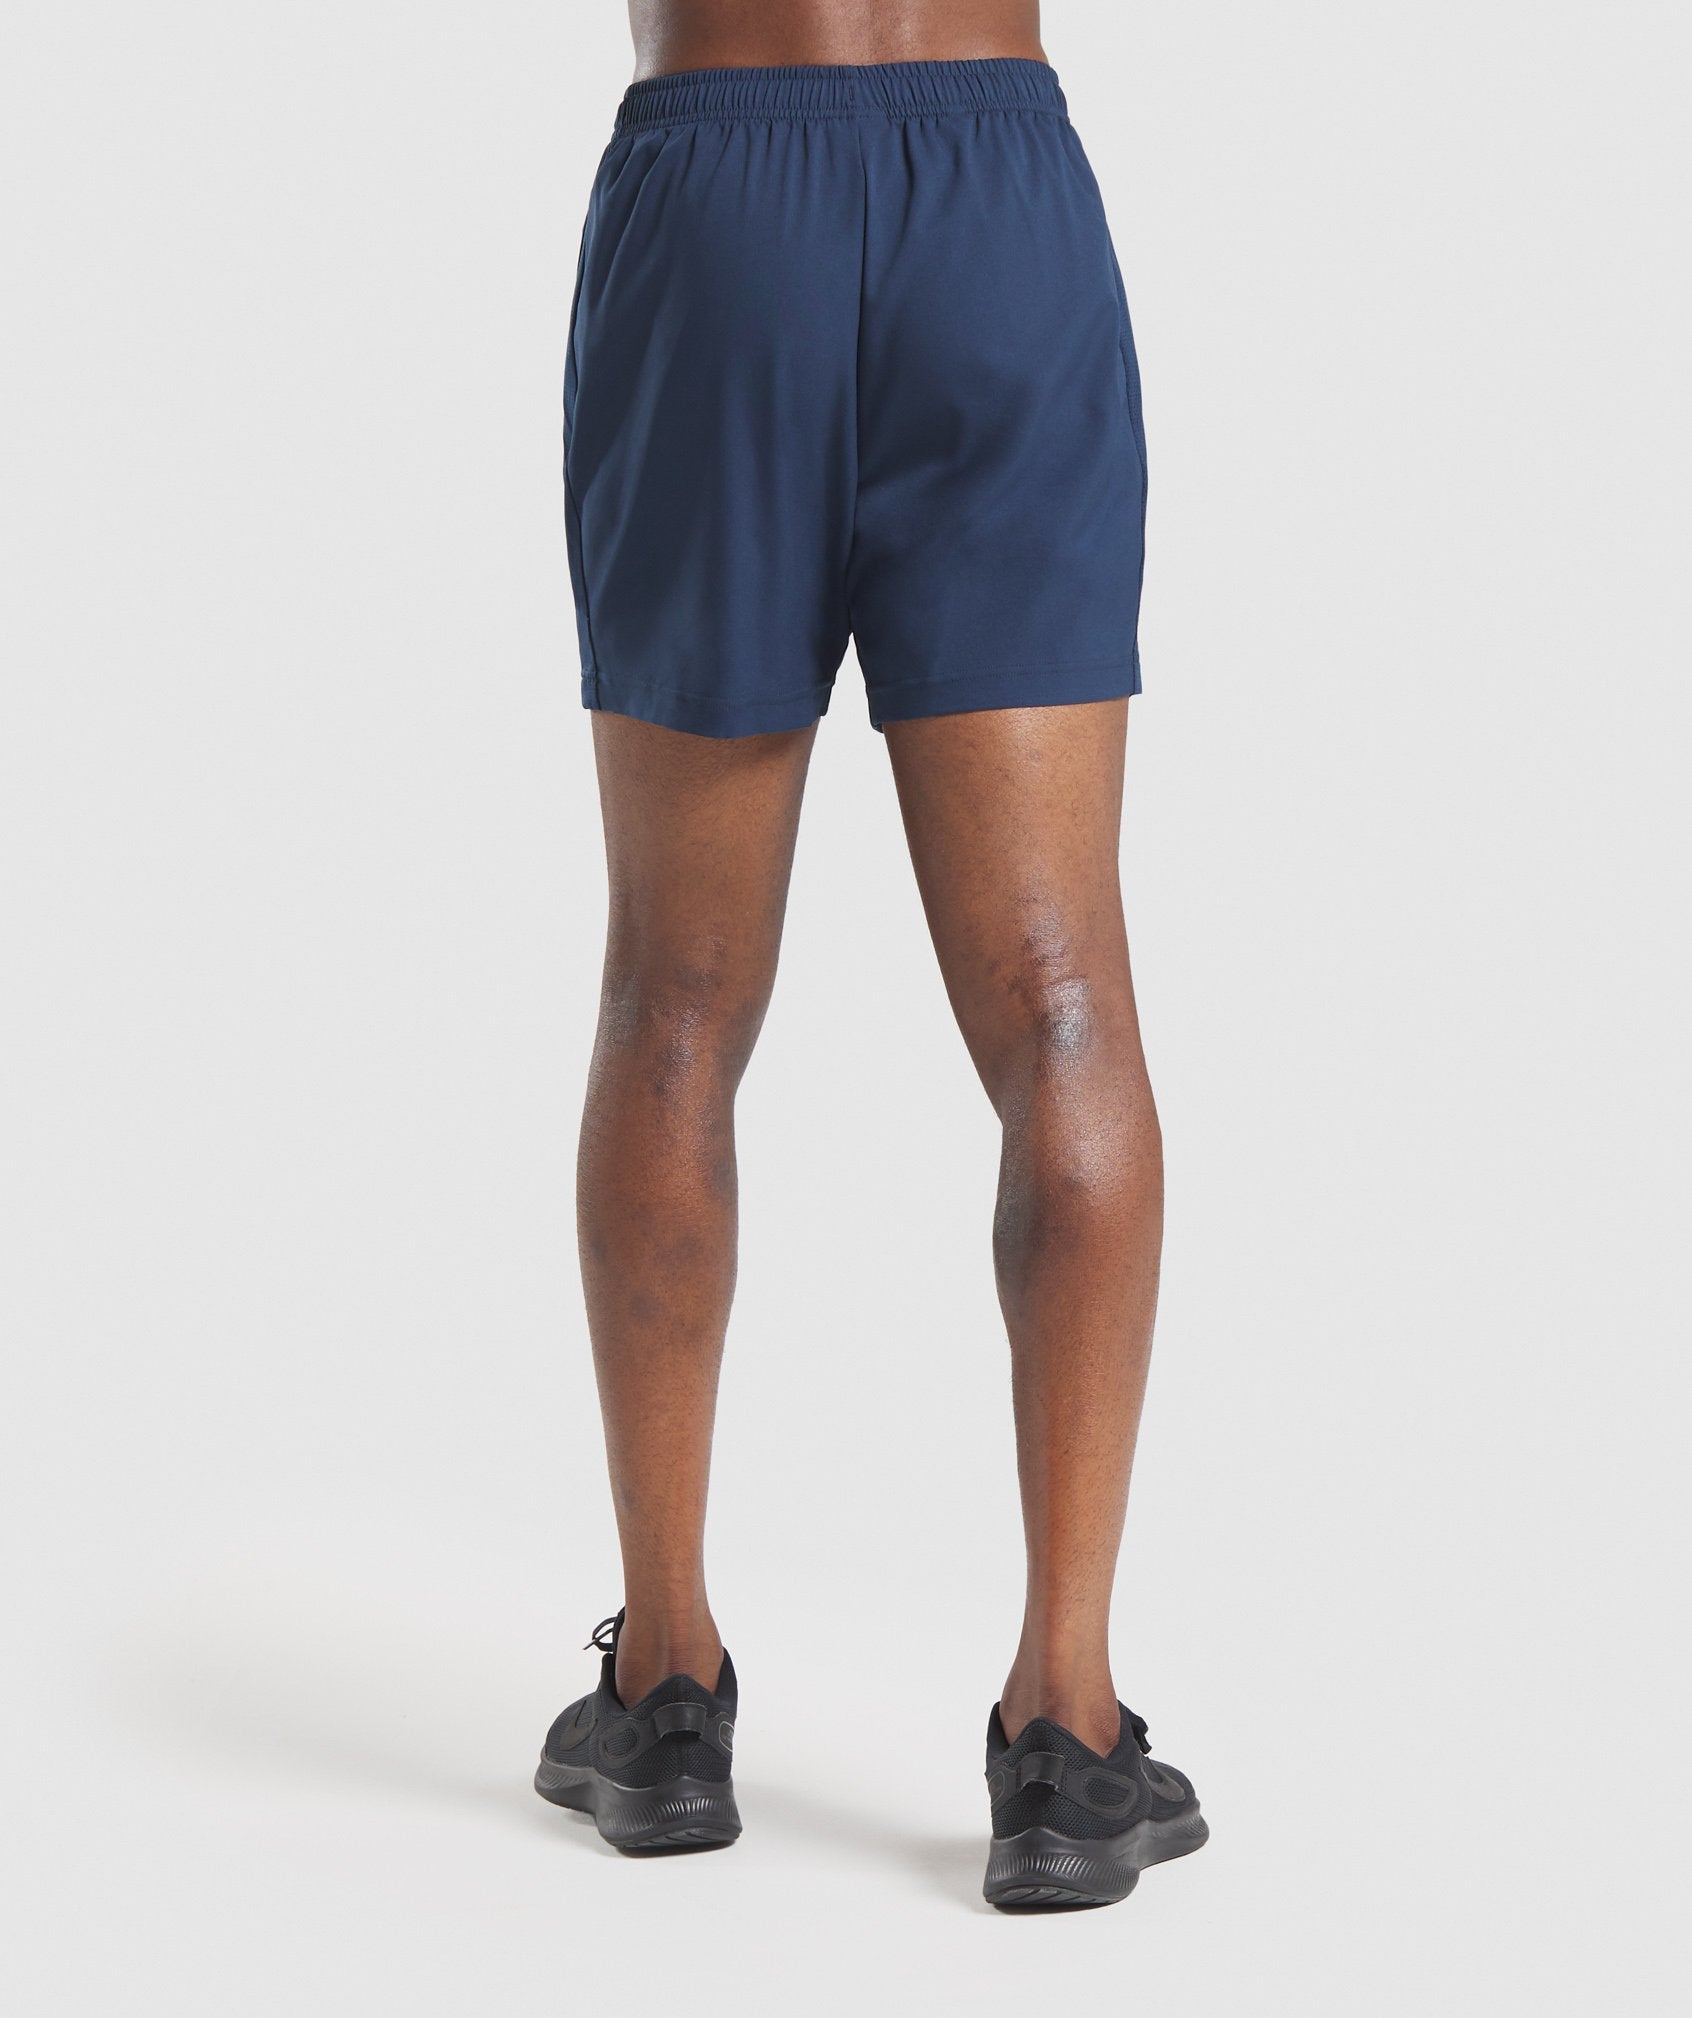 Sport Shorts in Navy - view 3